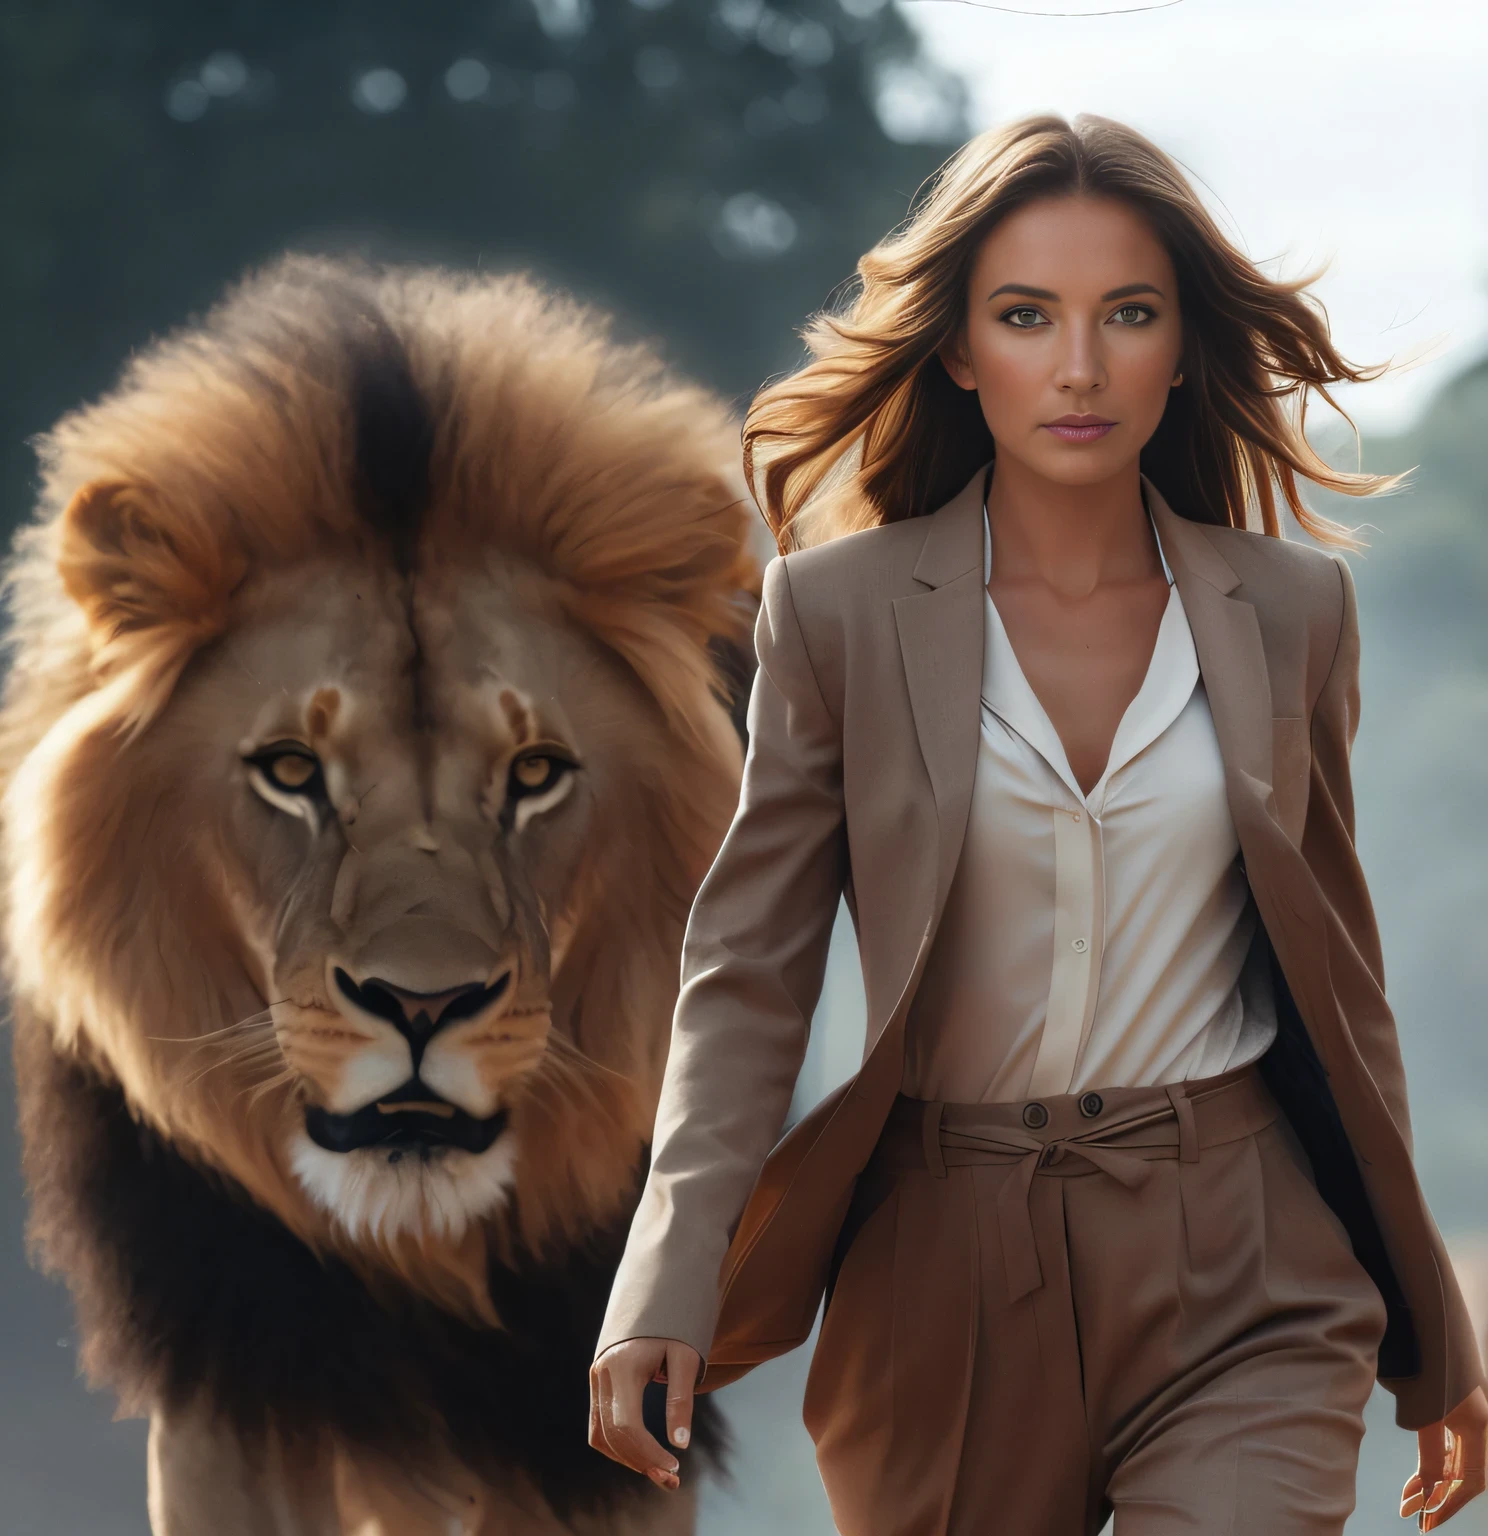 woman walking with a lion in the background, with the mane of a lion, national geographic photoshoot, lioness, realistic art, the man riding is on the lion, strong woman, queen of the jungle, intimidating woman, stunning woman, by Alexander Kucharsky, alina ivanchenko, regal and proud robust woman, lions, aleksandra waliszewska